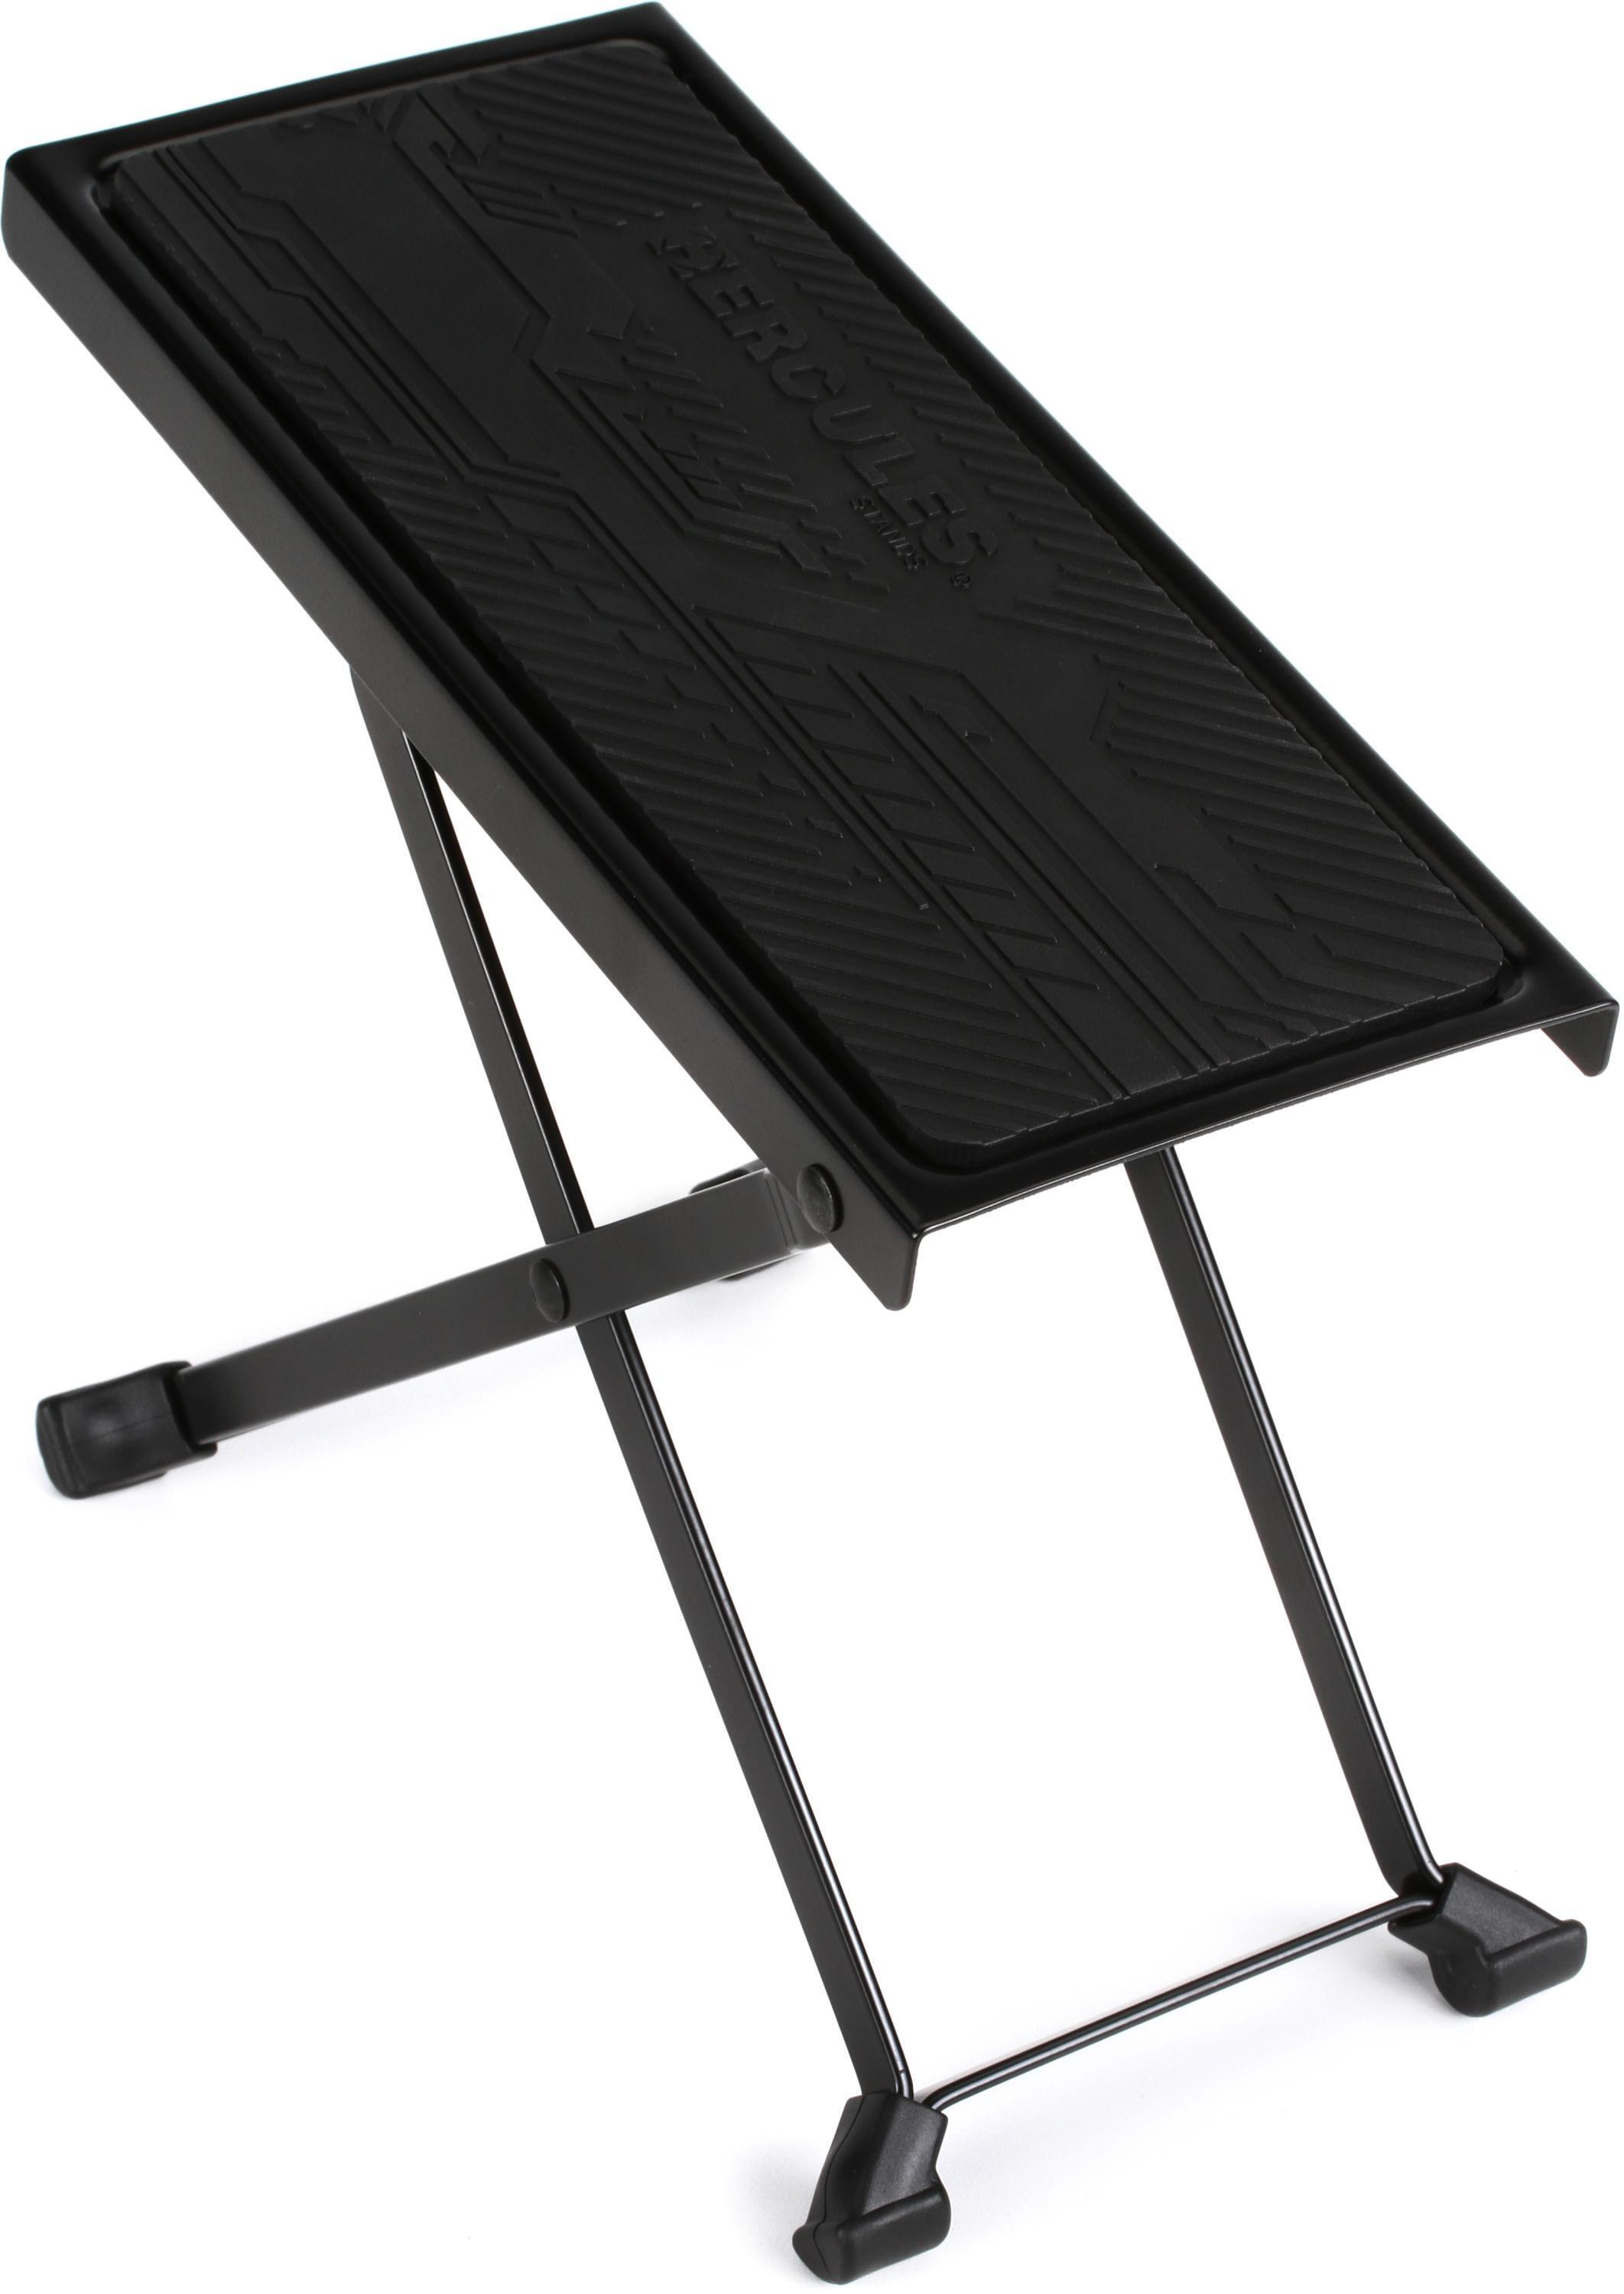 Guitar Foot Stand Metal Guitar Foot Stool Guitar Foot Rest For Playing With  Instruments 